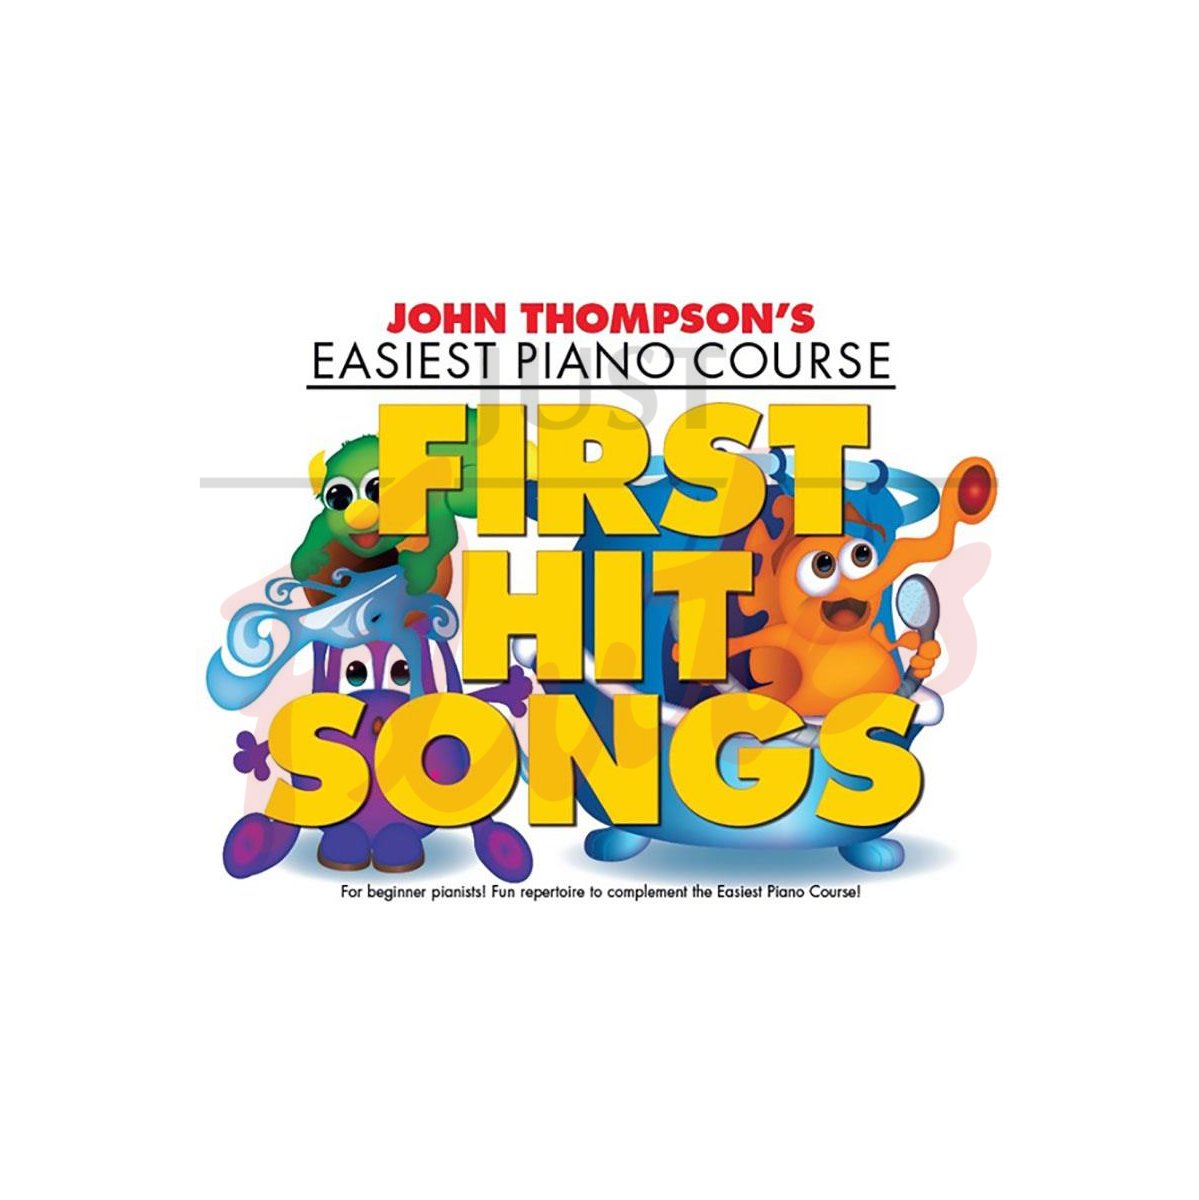 John Thompson's Easiest Piano Course - First Hit Songs